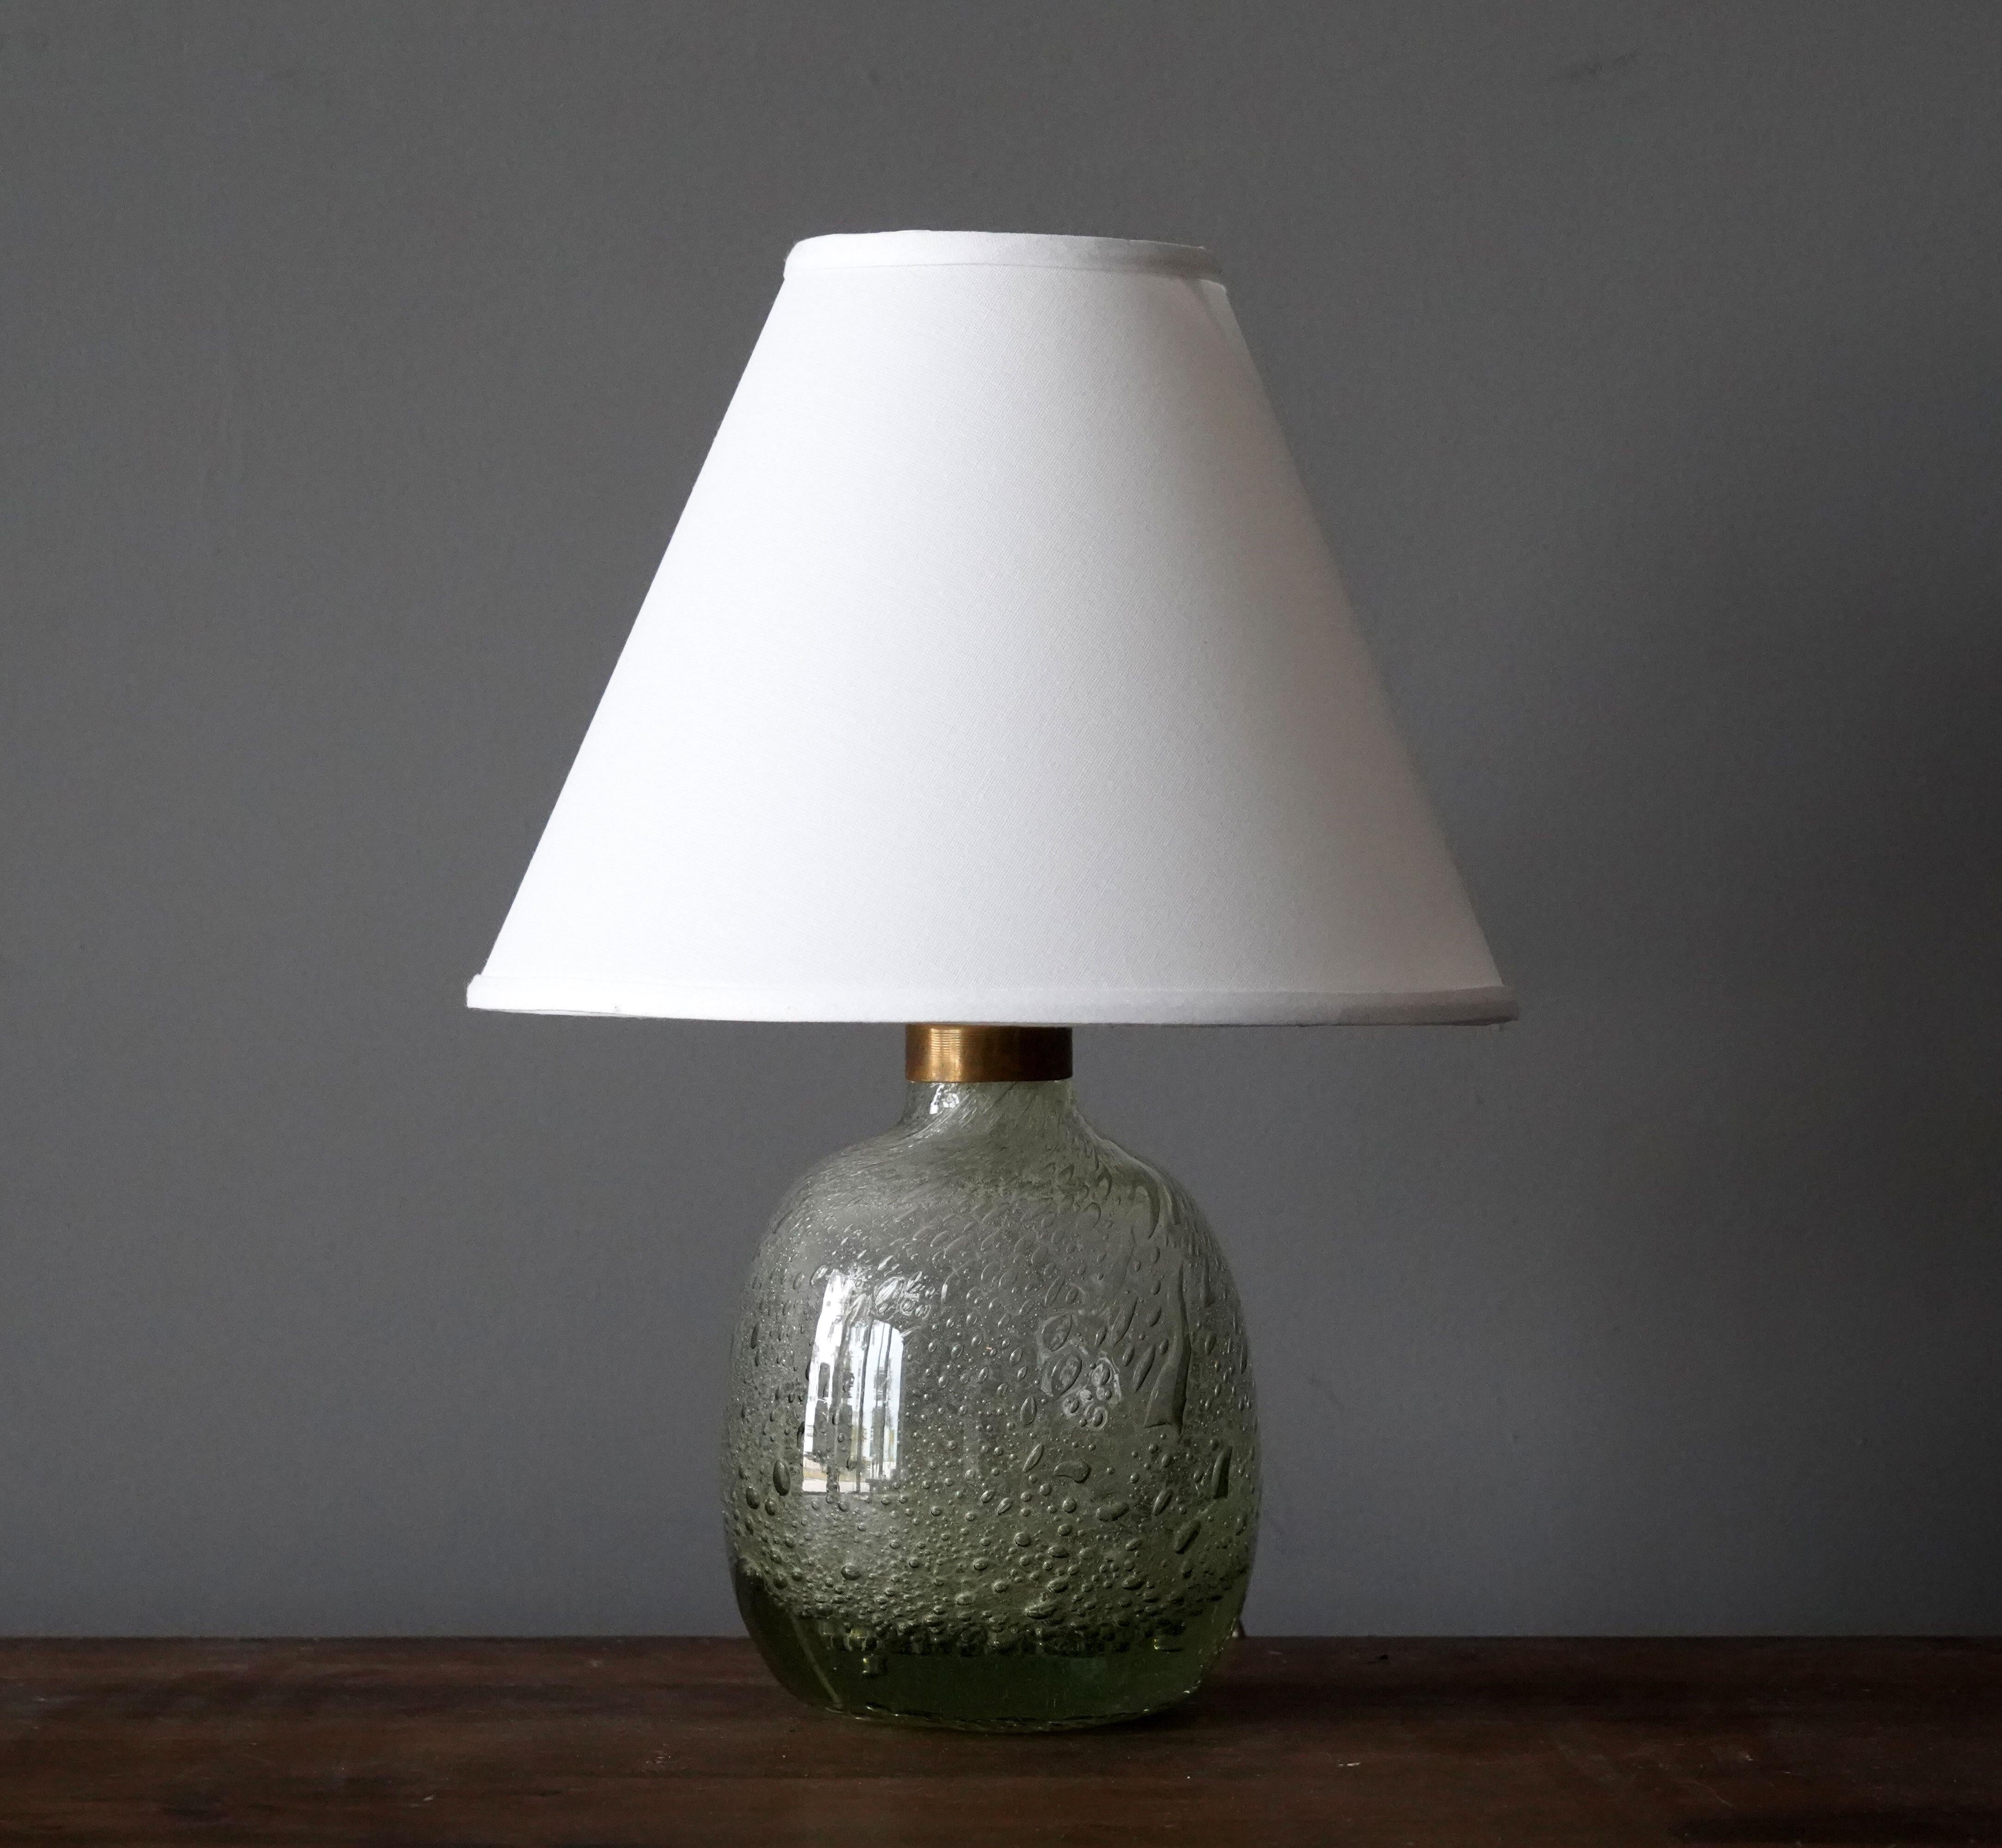 A table lamp by Ture Berglund, in brass and green colored studio glass. Produced by Stockholms Glasbruk, 1930s.

Sold without lampshade. Stated dimensions excluding lampshade.

Other lighting designers of the period include Hans-Agne Jacobson,